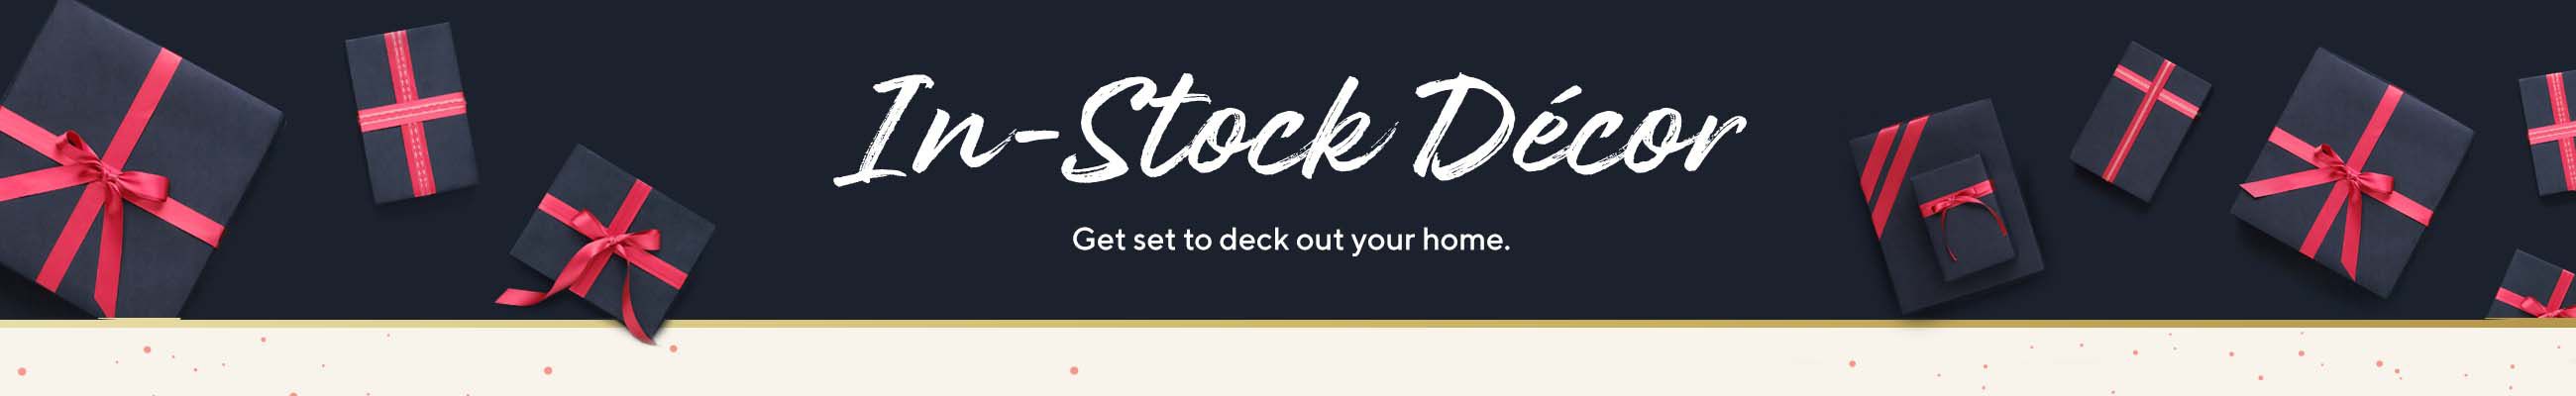 In-Stock Décor   Get set to deck out your home.